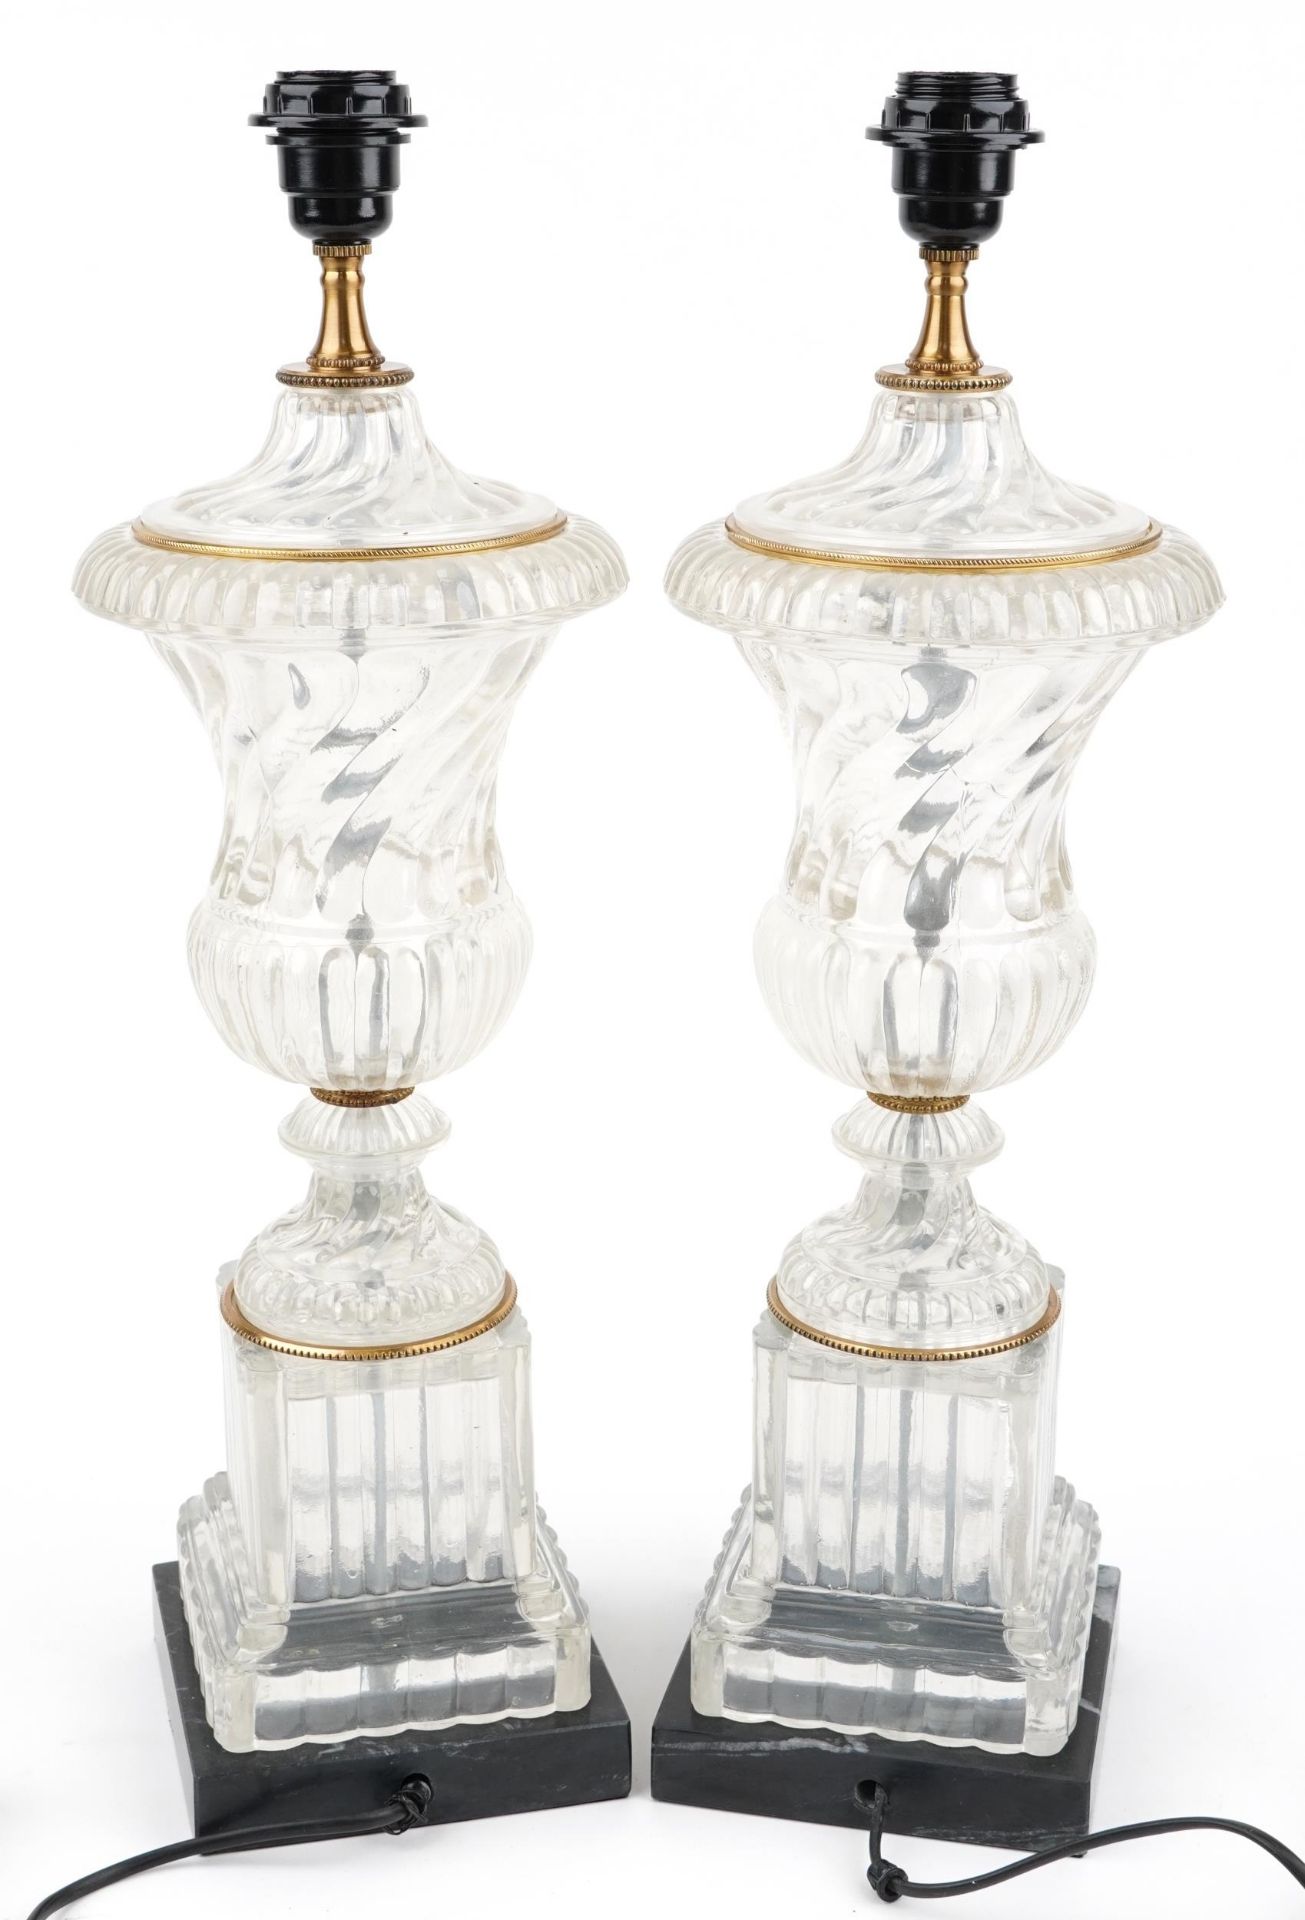 Pair of French style glass urn table lamps with gilt metal mounts raised on faux marble bases, - Image 2 of 2